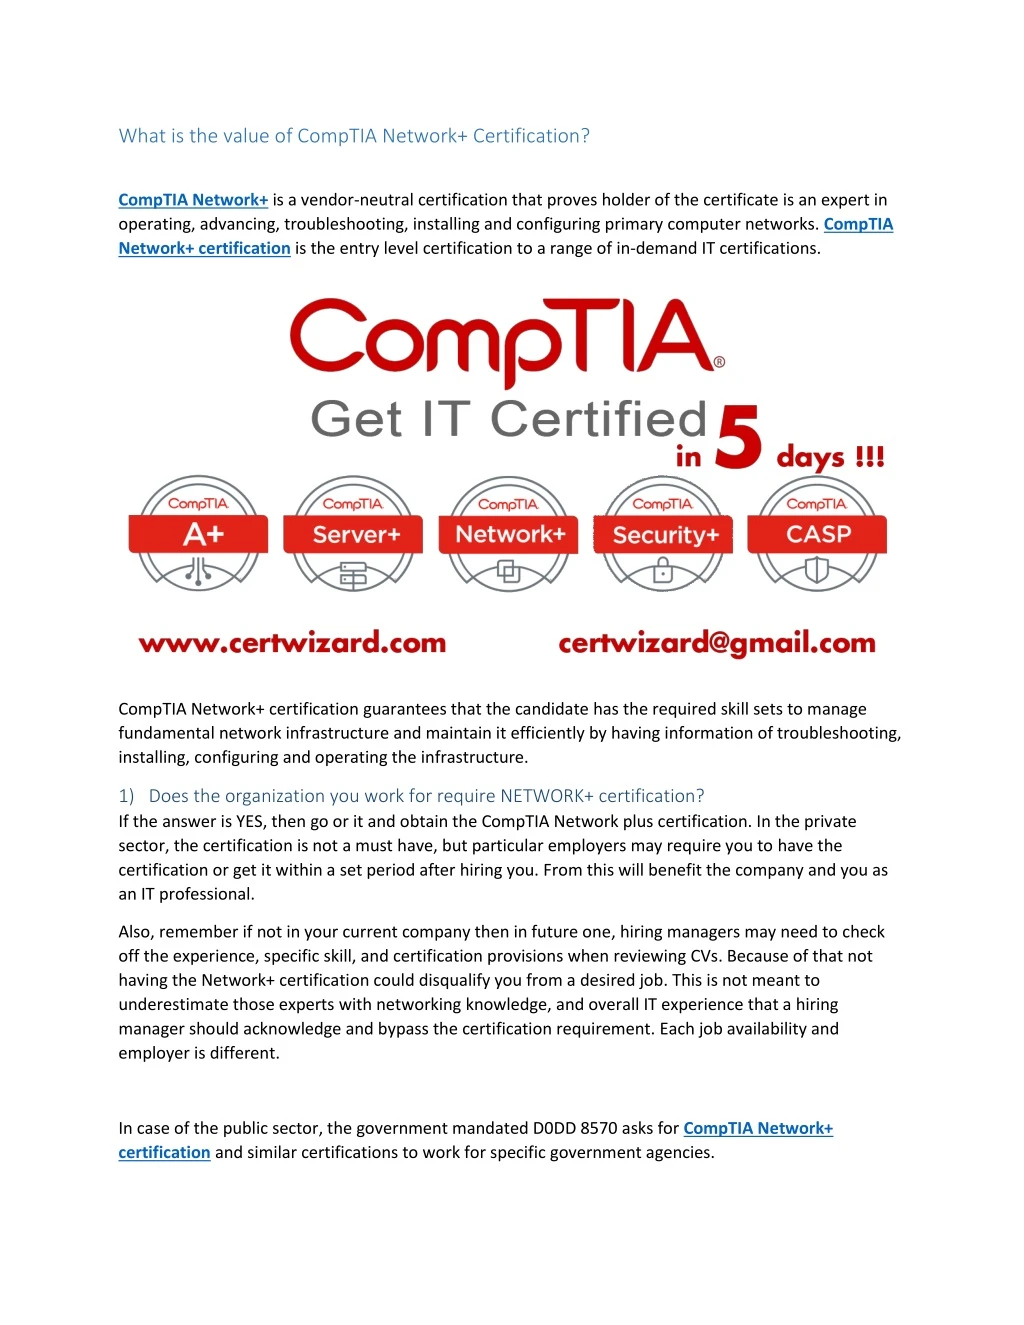 what is the value of comptia network certification